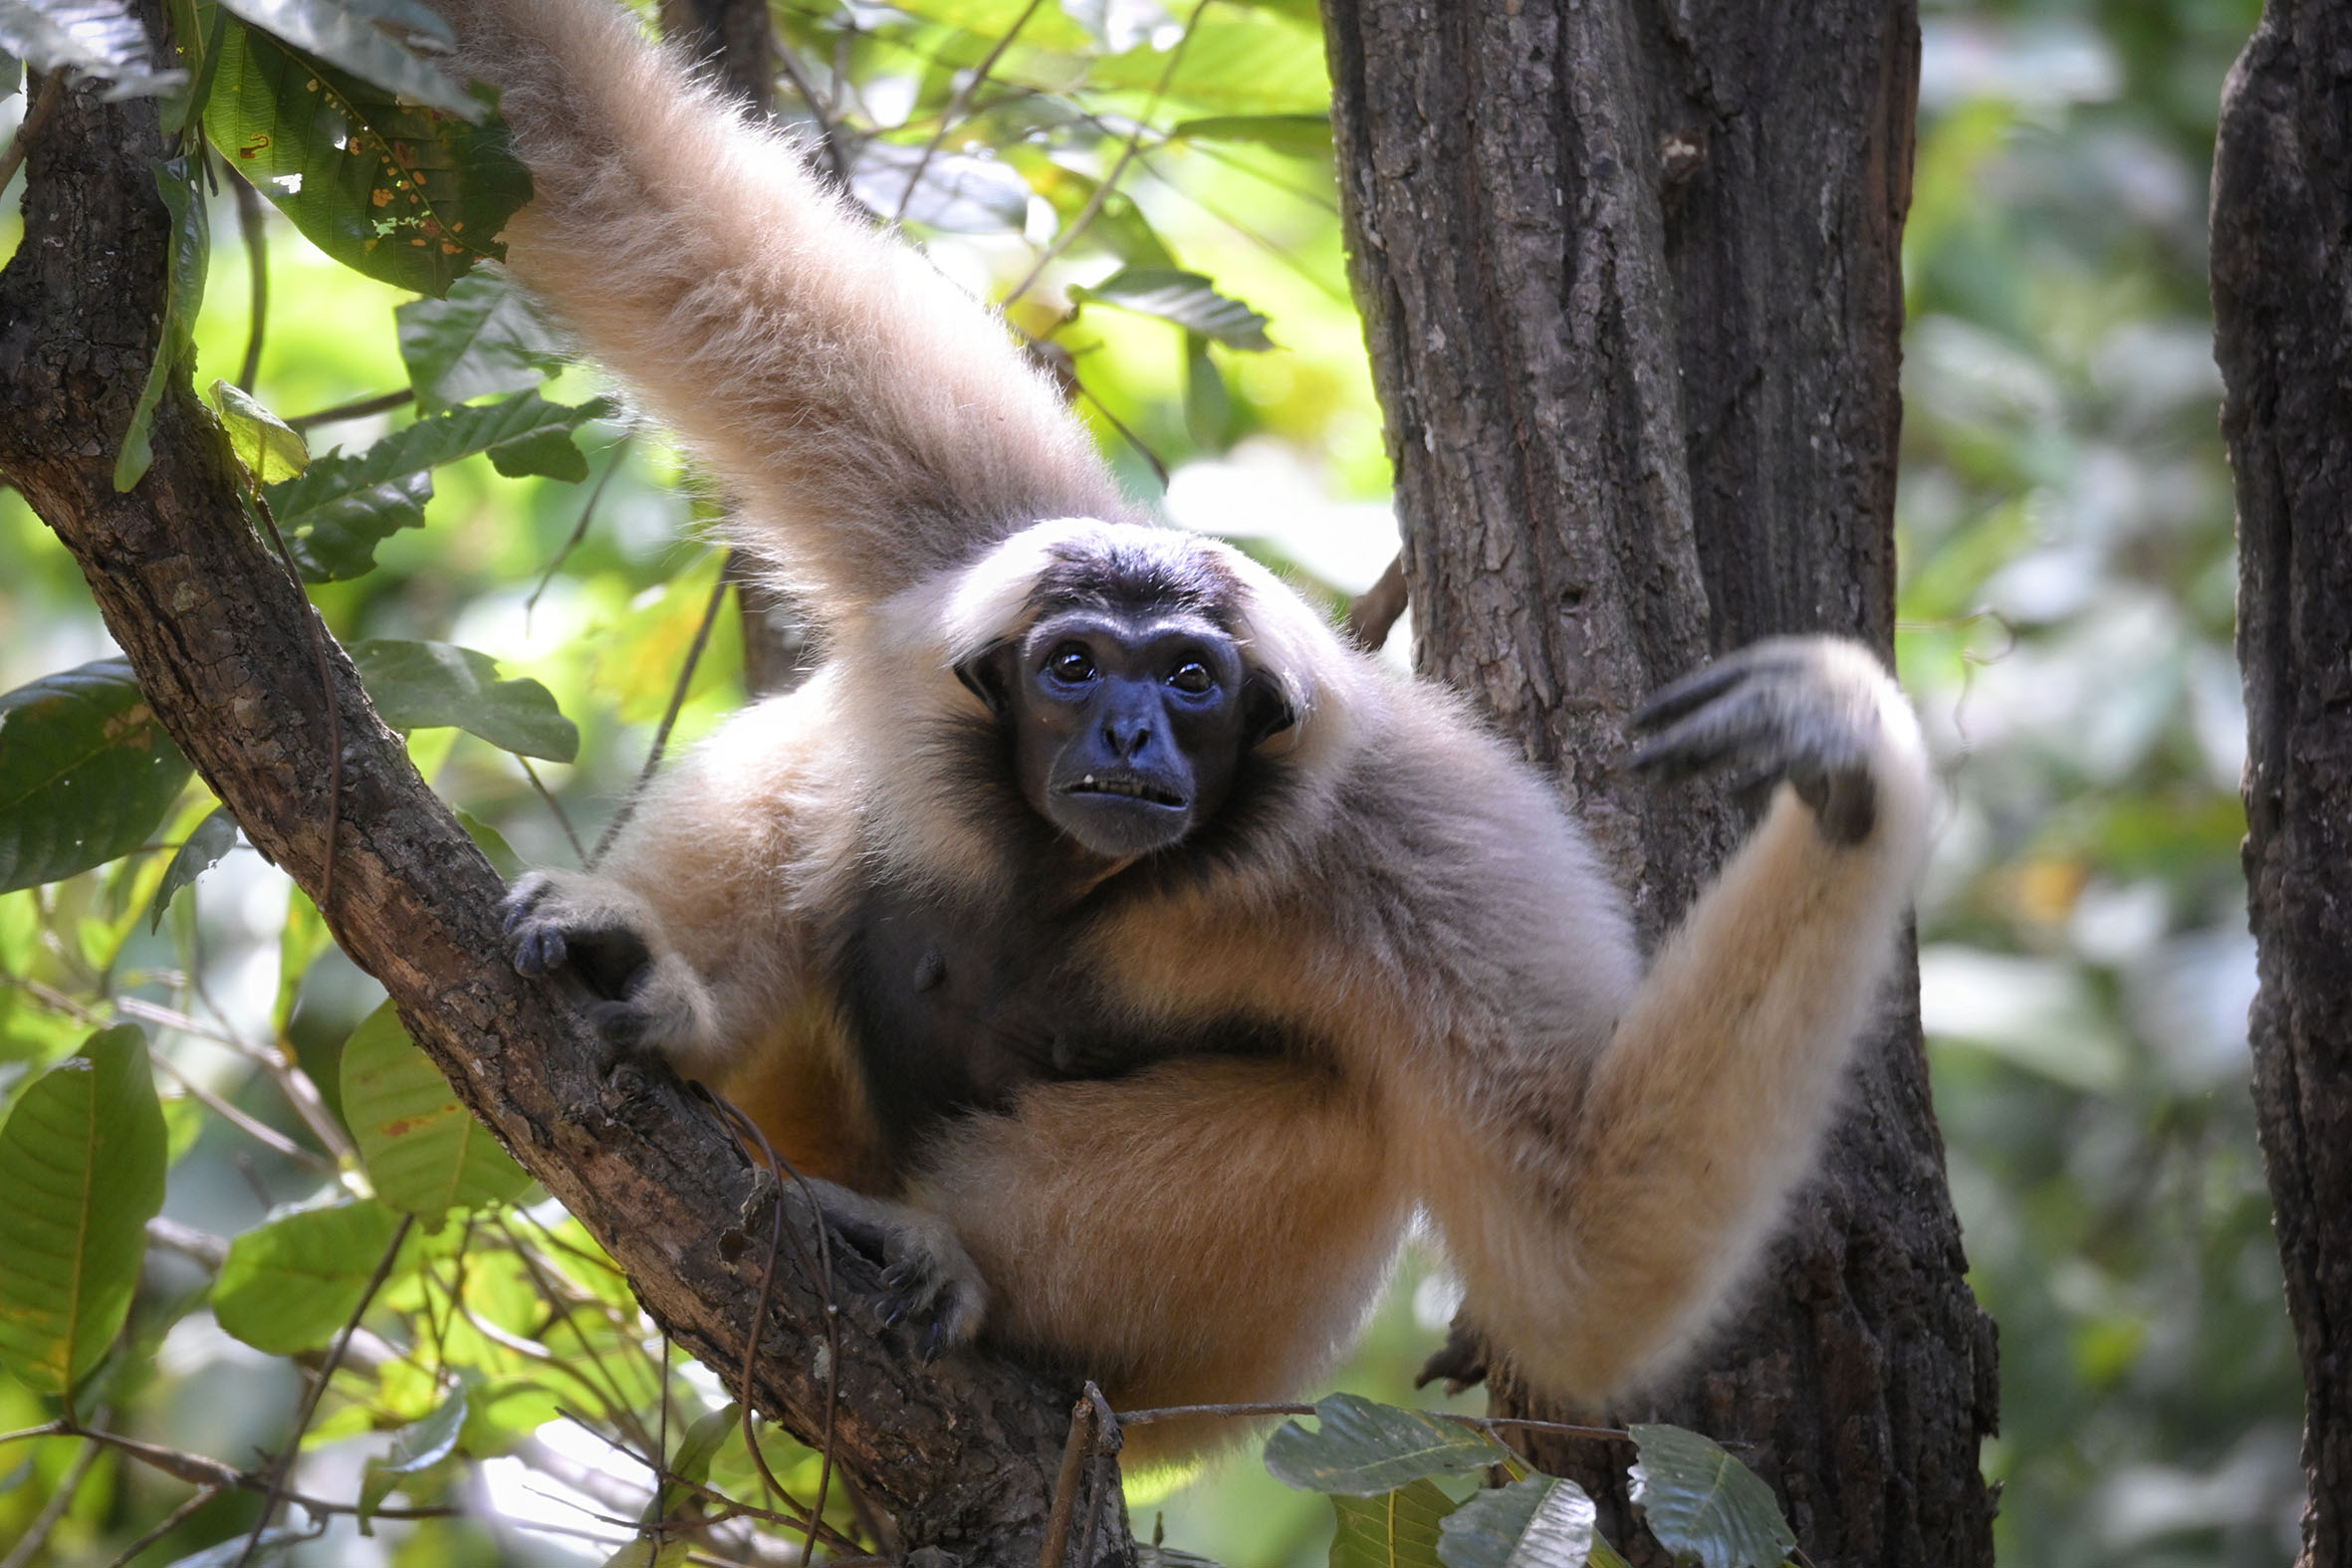 A pileated gibbon in Cambodia’s Preah Vihear province. Large mammals such as primates are disappearing rapidly from South-east Asia's forests. ST PHOTO: MARK CHEONG